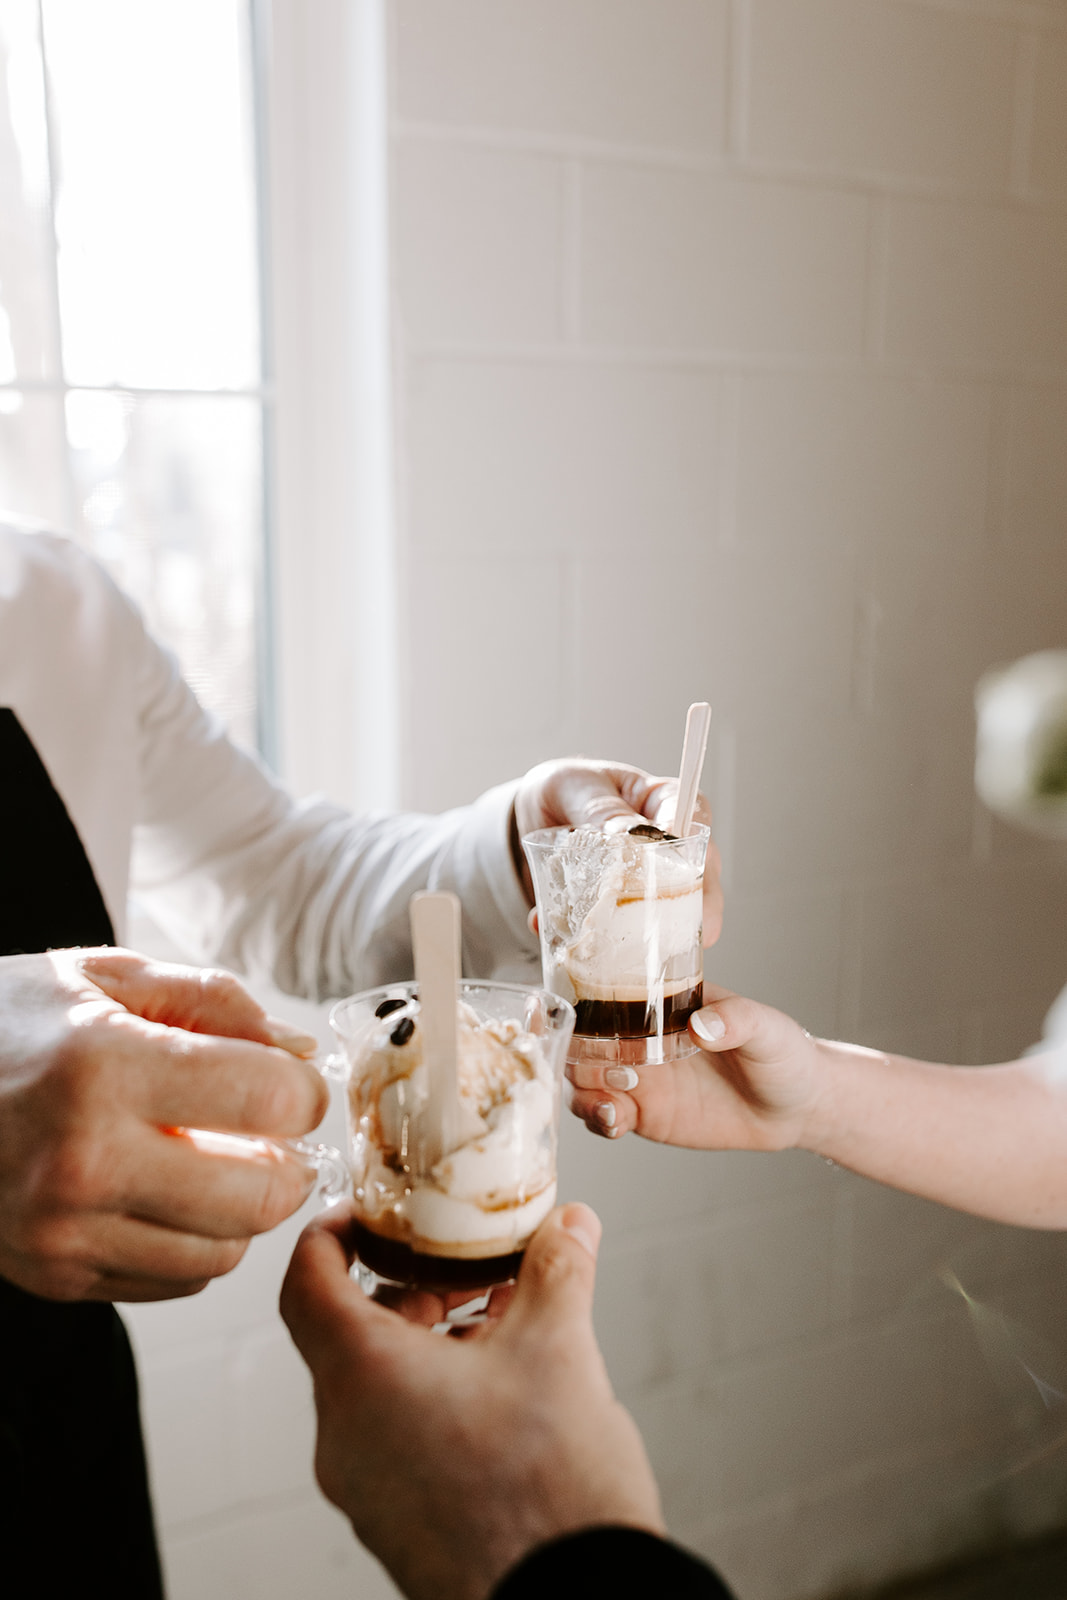 bride and groom share ice cream together after their stunning wedding at The factory wedding venue